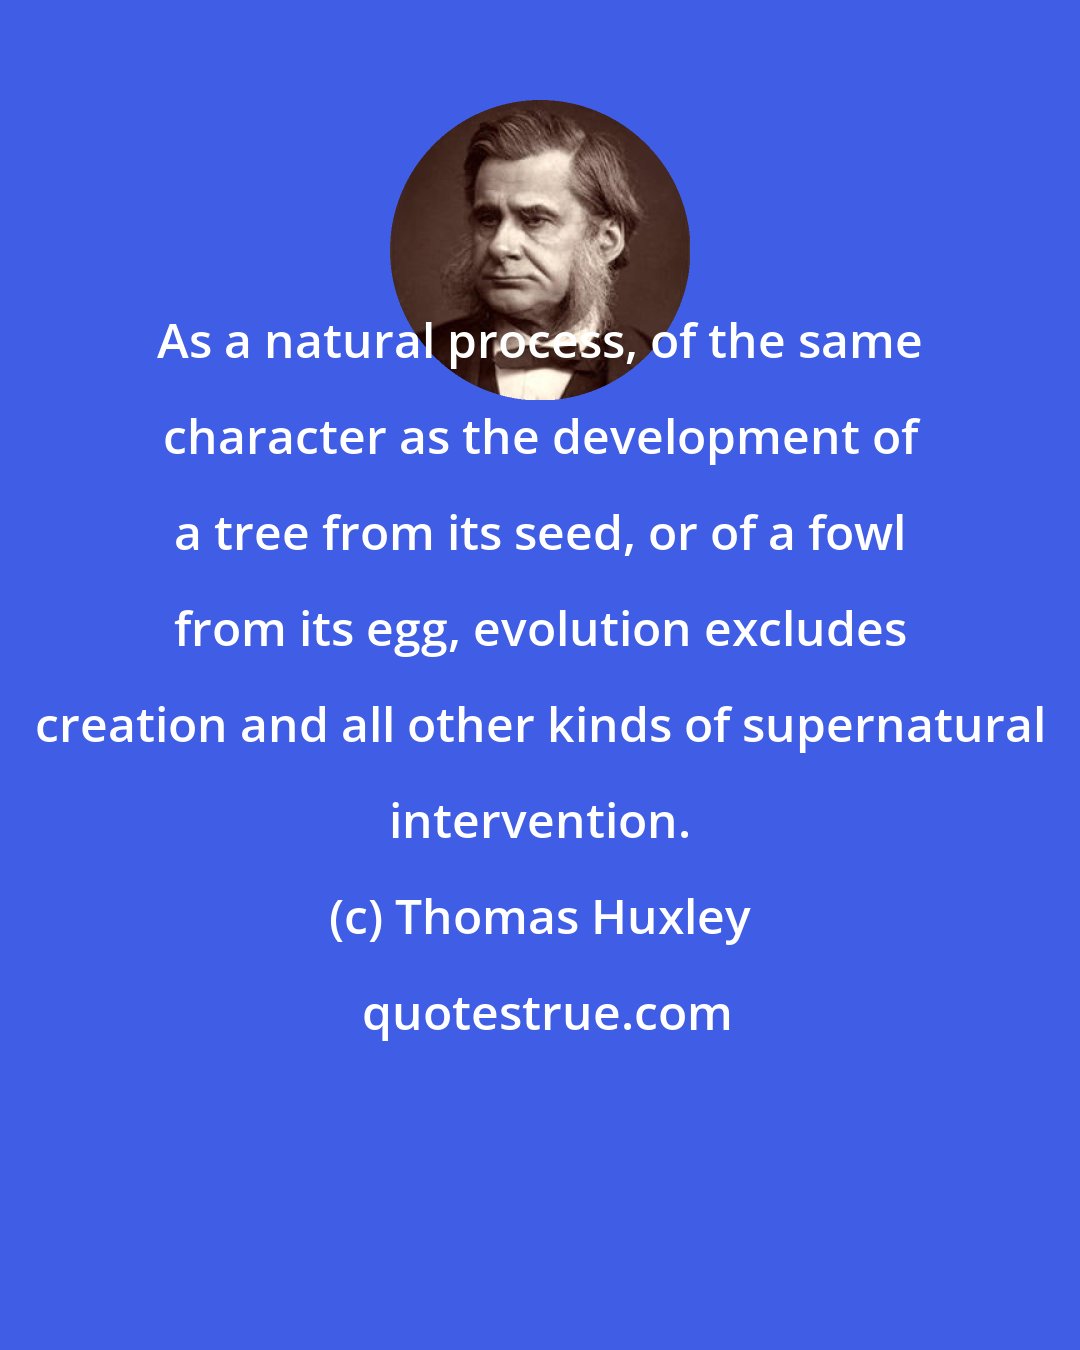 Thomas Huxley: As a natural process, of the same character as the development of a tree from its seed, or of a fowl from its egg, evolution excludes creation and all other kinds of supernatural intervention.